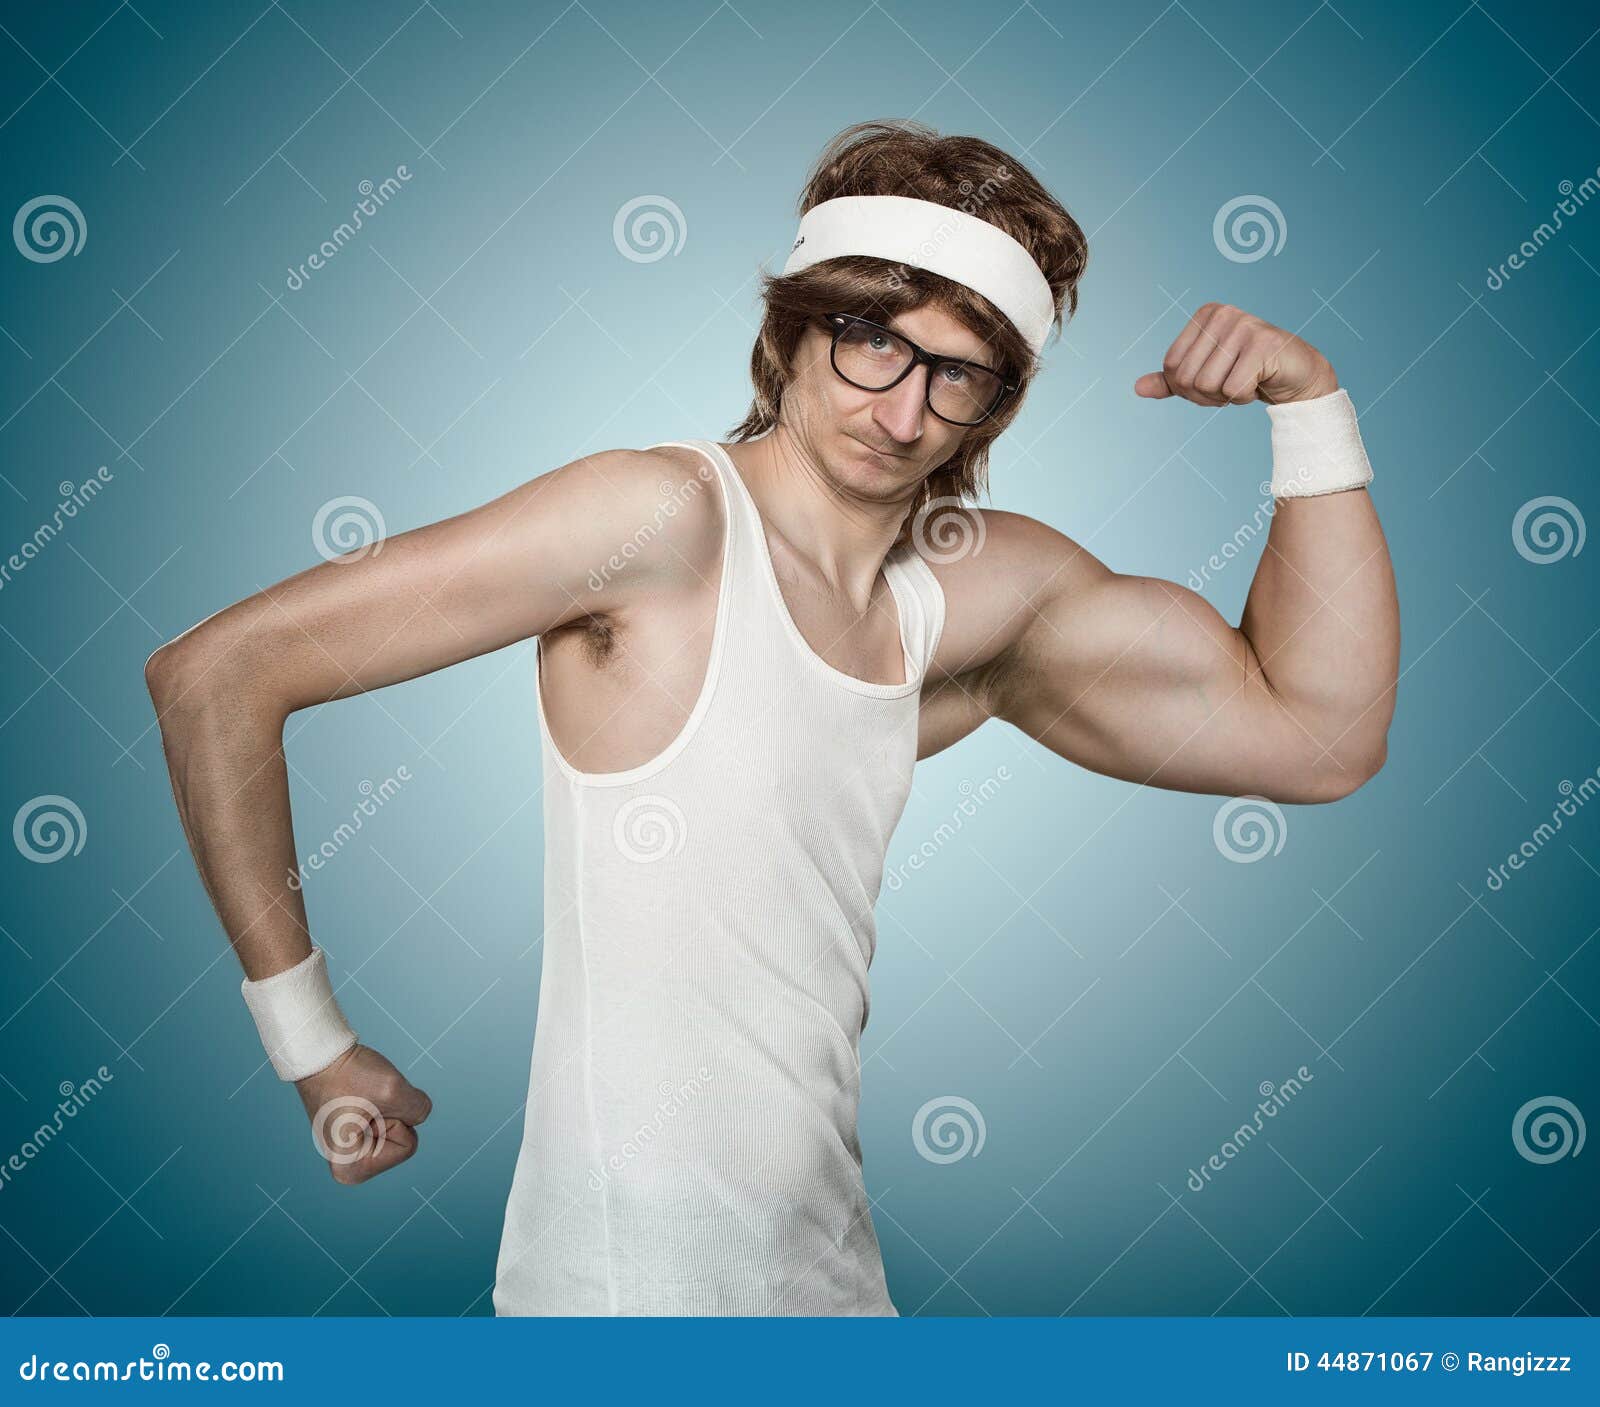 funny-retro-nerd-one-huge-arm-flexing-his-muscle-over-blue-background-44871067.jpg